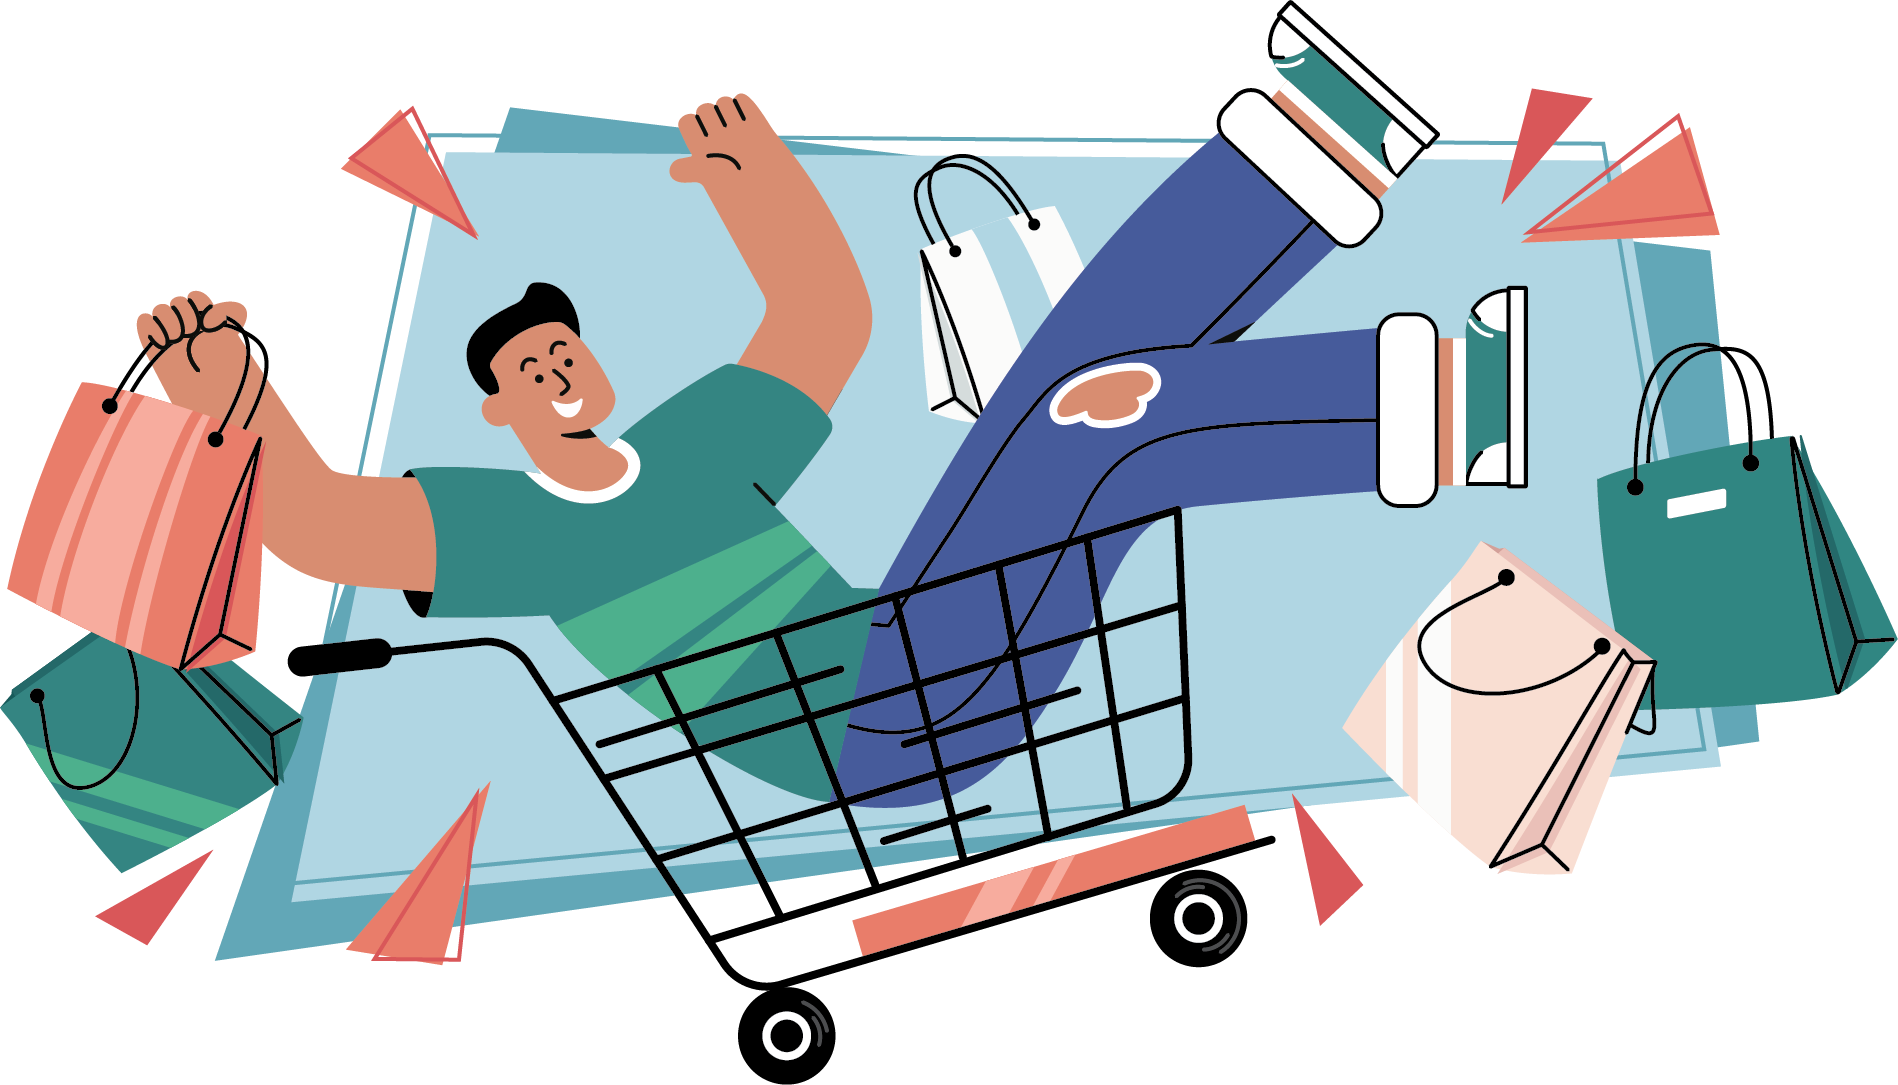 Illustration of person riding in shopping cart with shopping bags around them